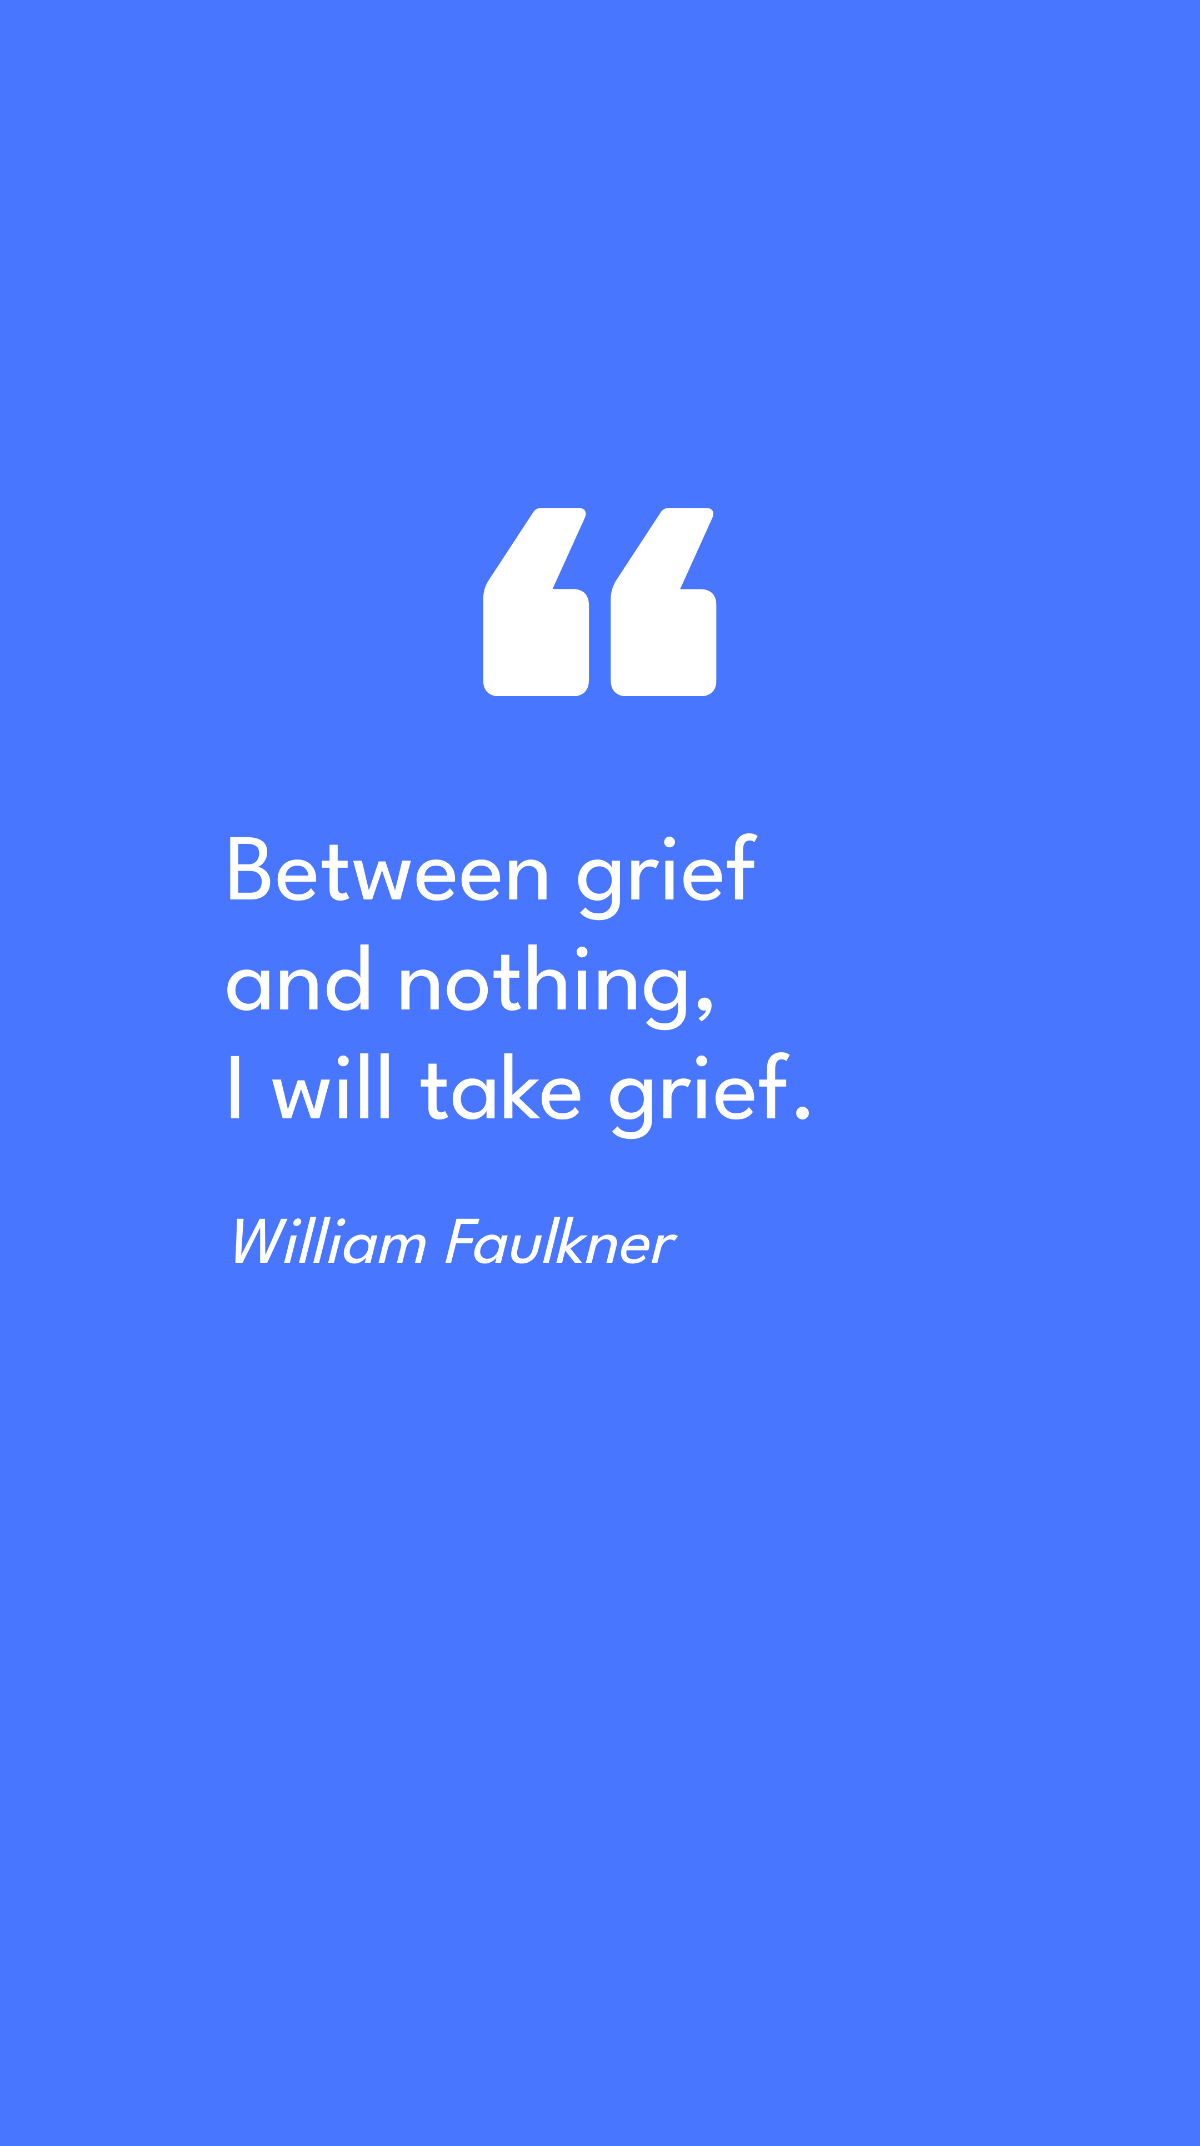 Free William Faulkner - Between grief and nothing, I will take grief. Template